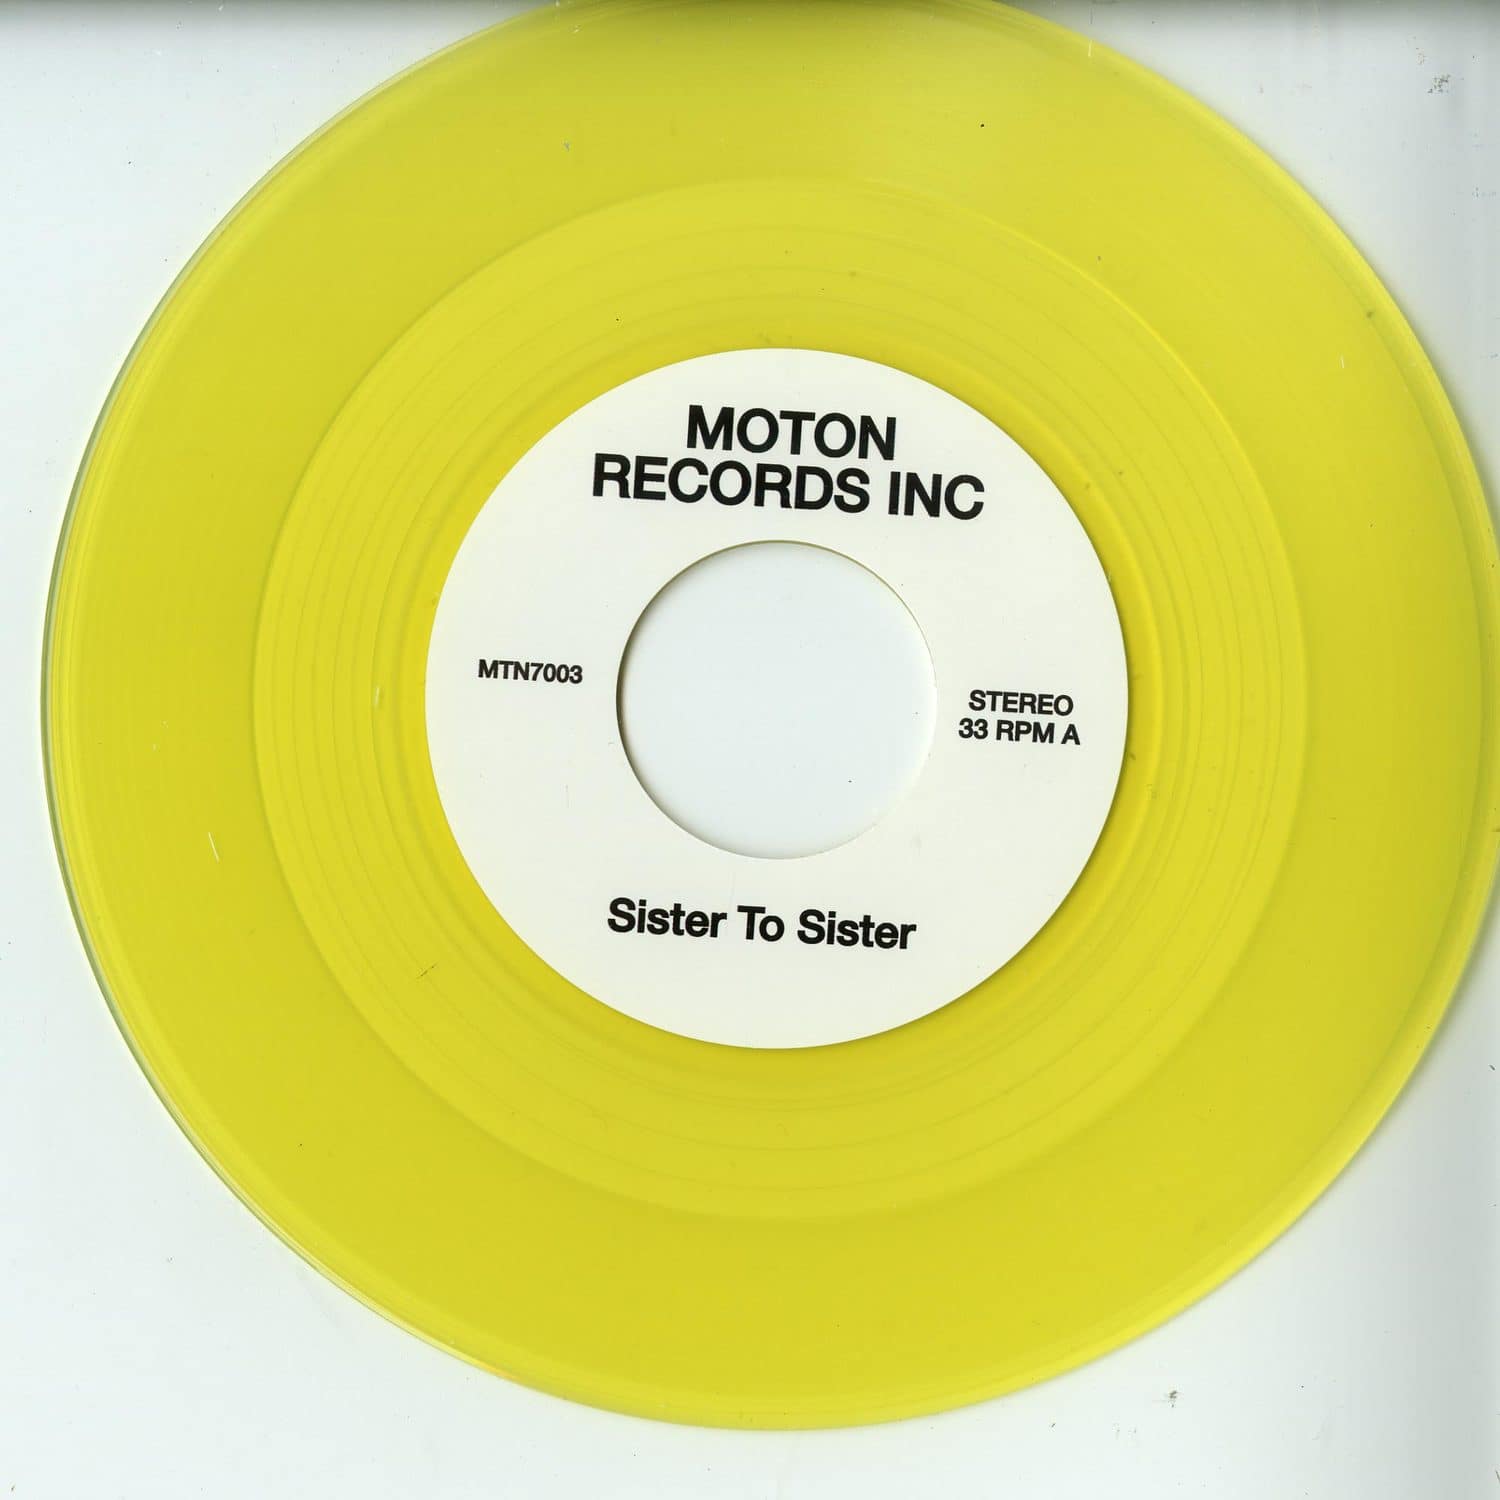 Moton Records Inc - SISTER TO SISTER / WE ARE THE SUNSET 